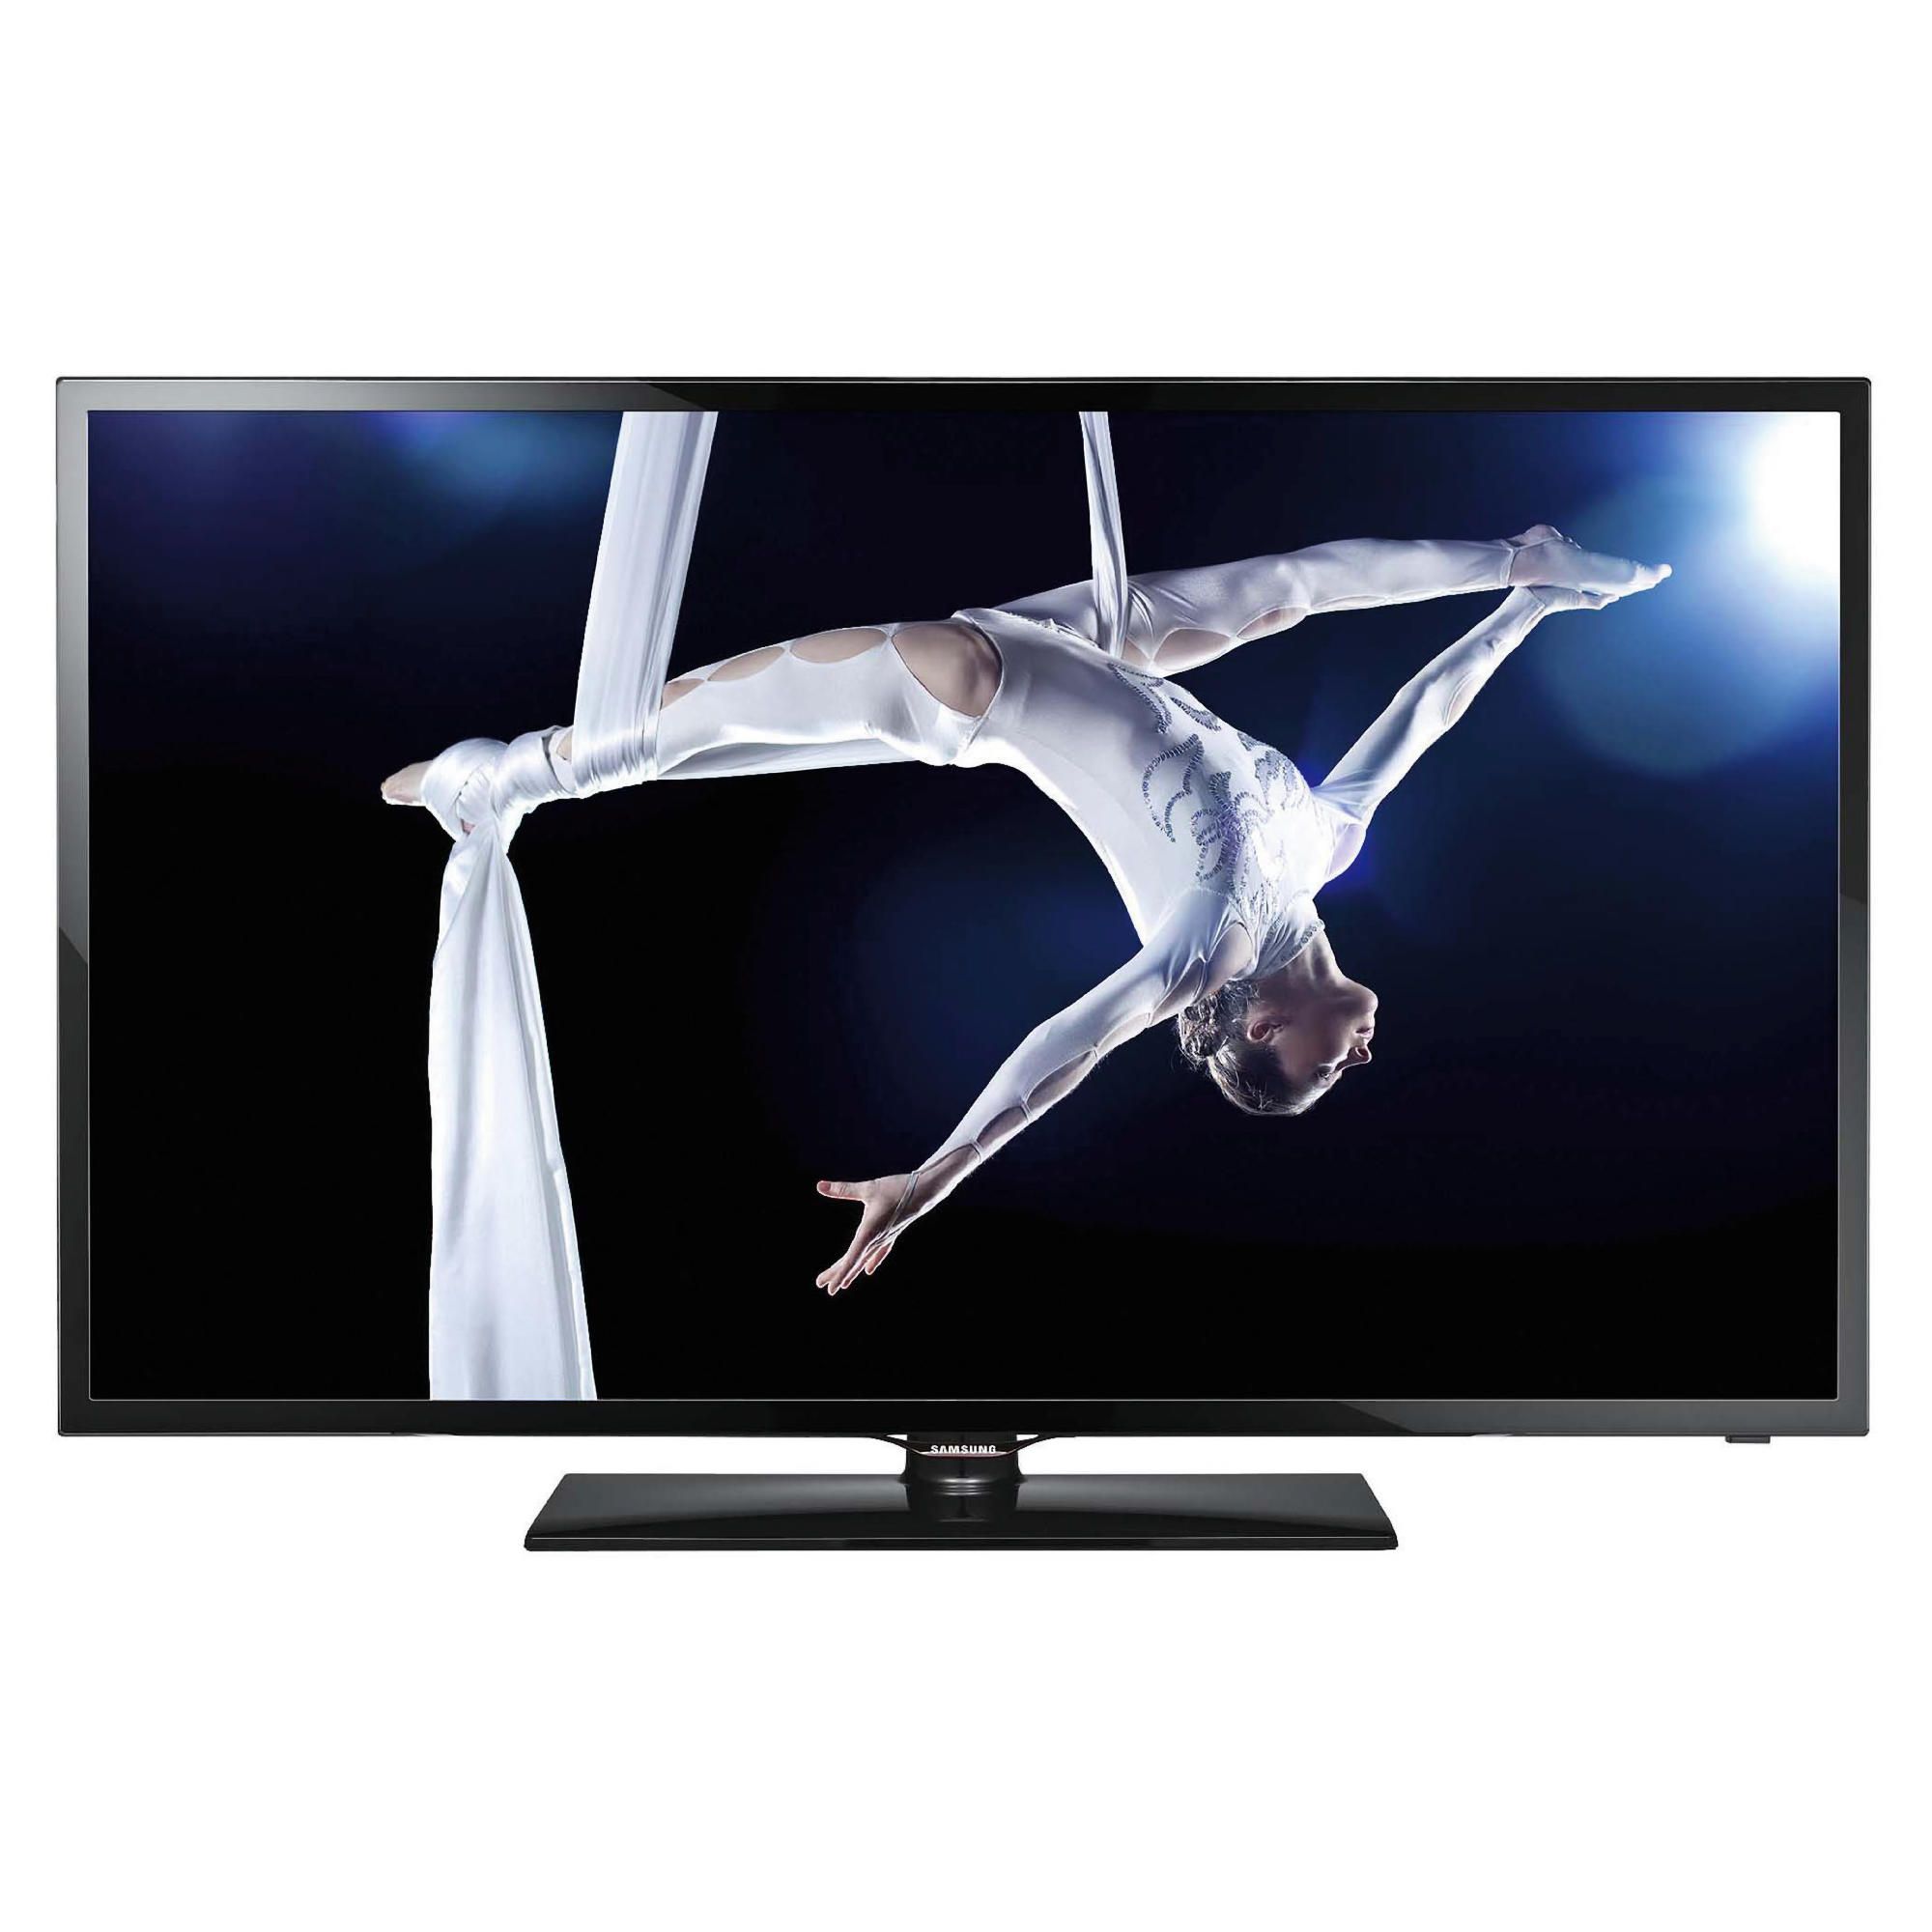 Samsung UE46F5000 46 Inch Full HD 1080p LED TV with Freeview HD